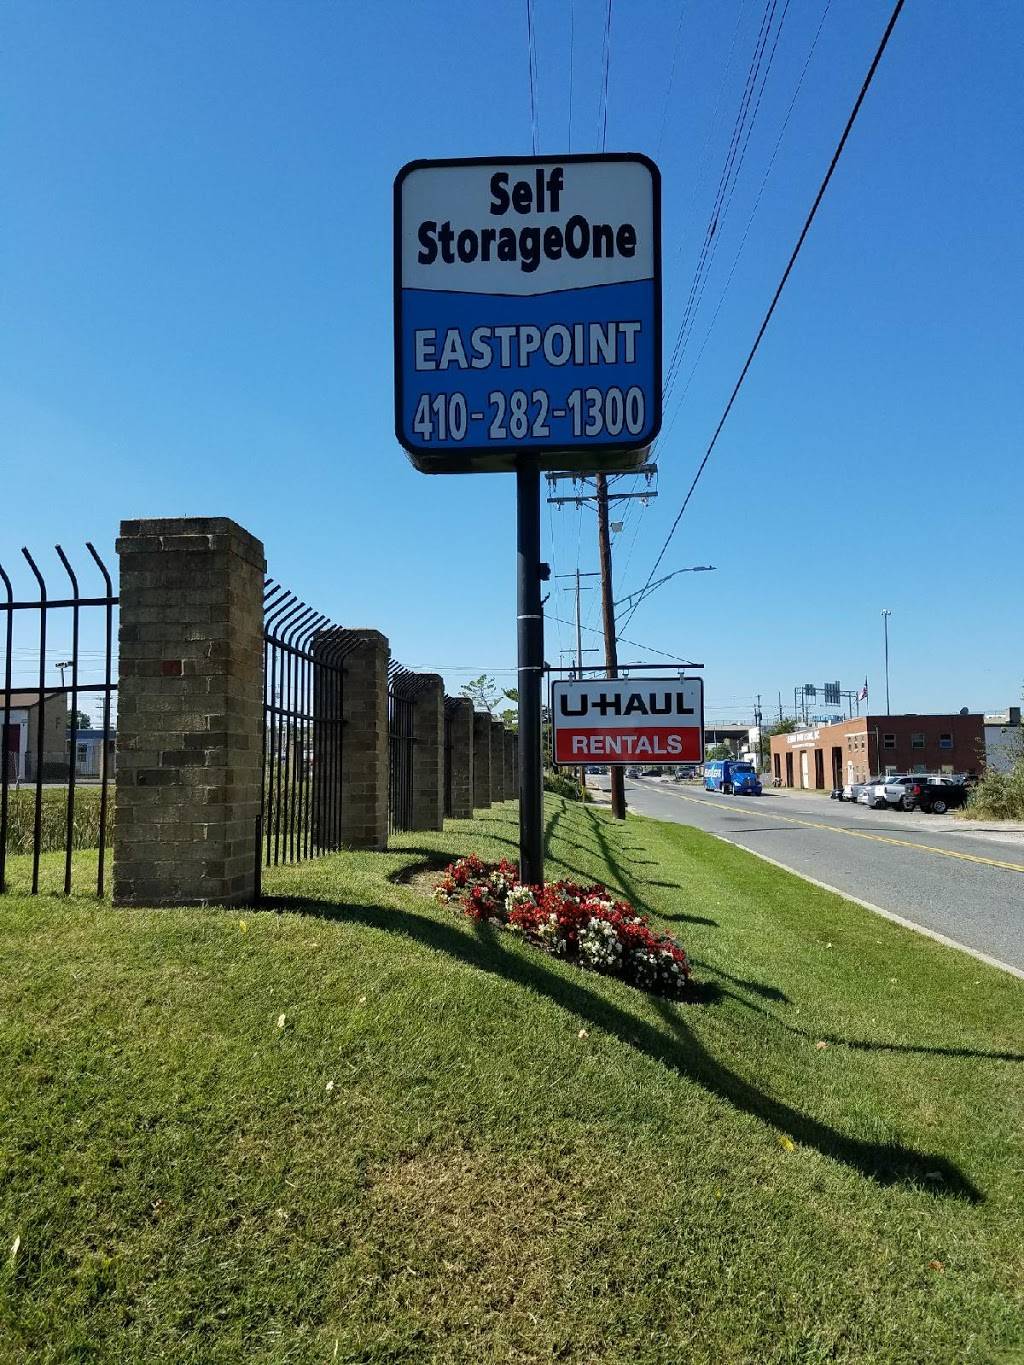 Self StorageOne Eastpoint | 6815 Rolling Mill Rd, Baltimore, MD 21224, USA | Phone: (410) 282-1300